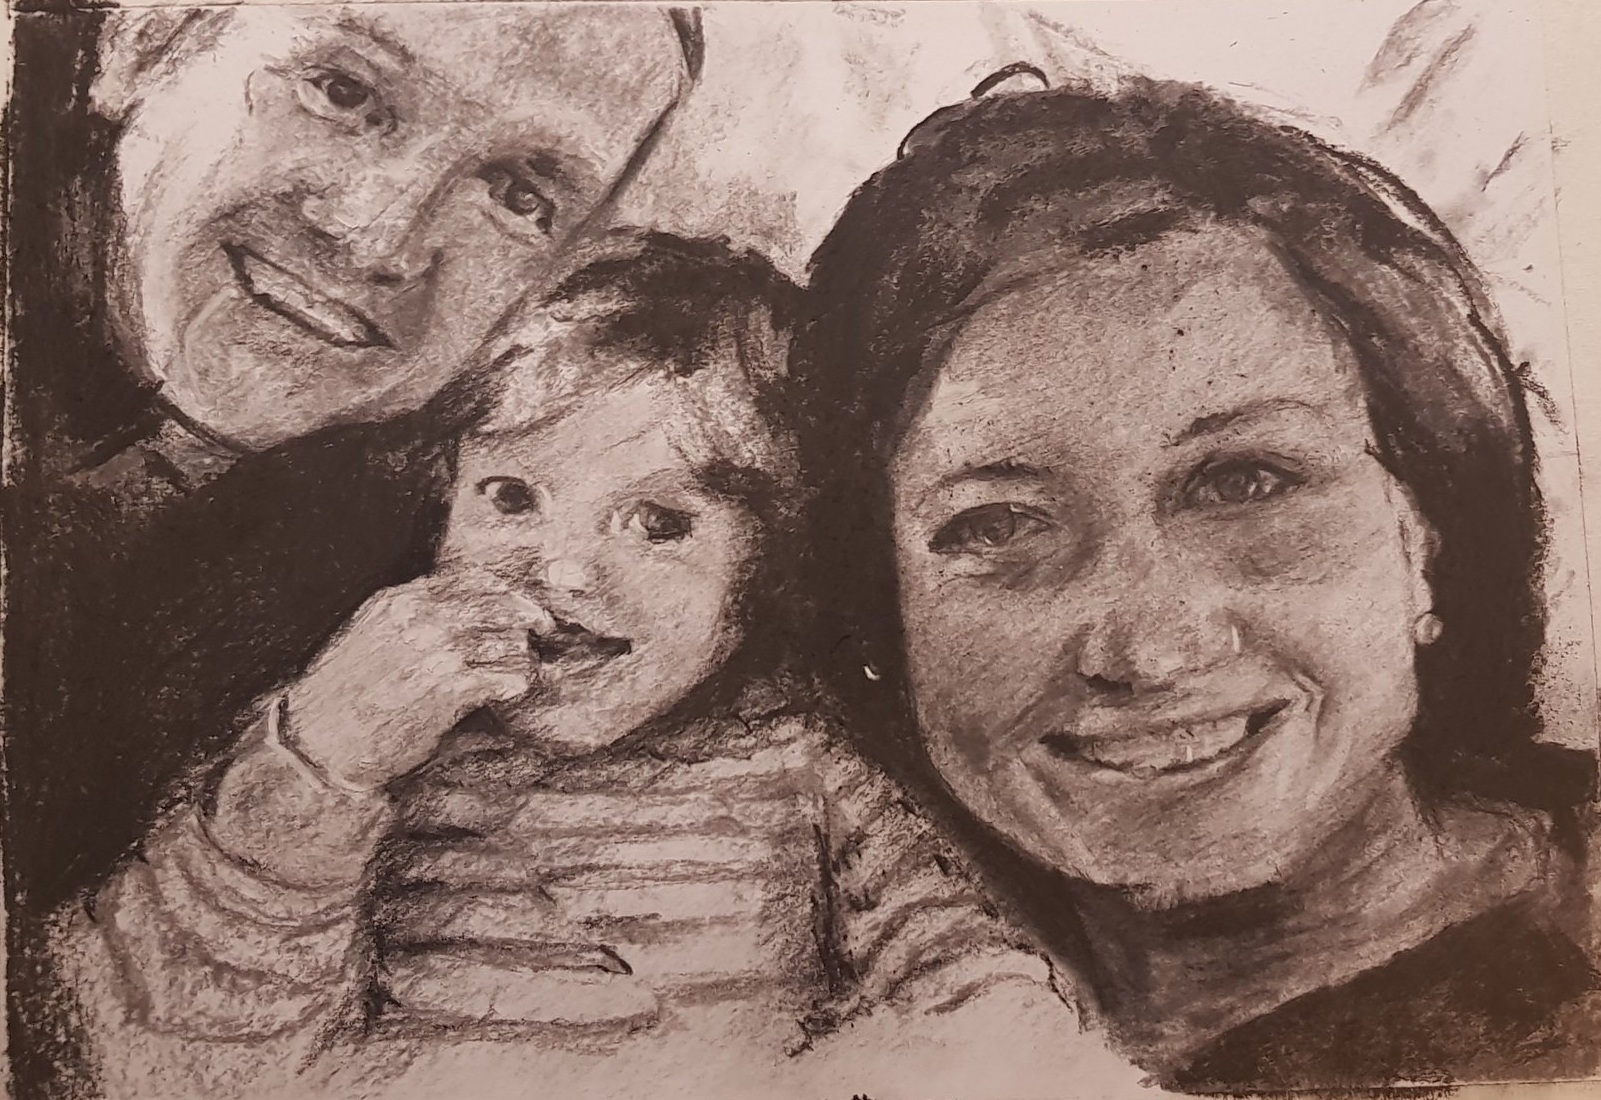 A family. Charcoal on paper